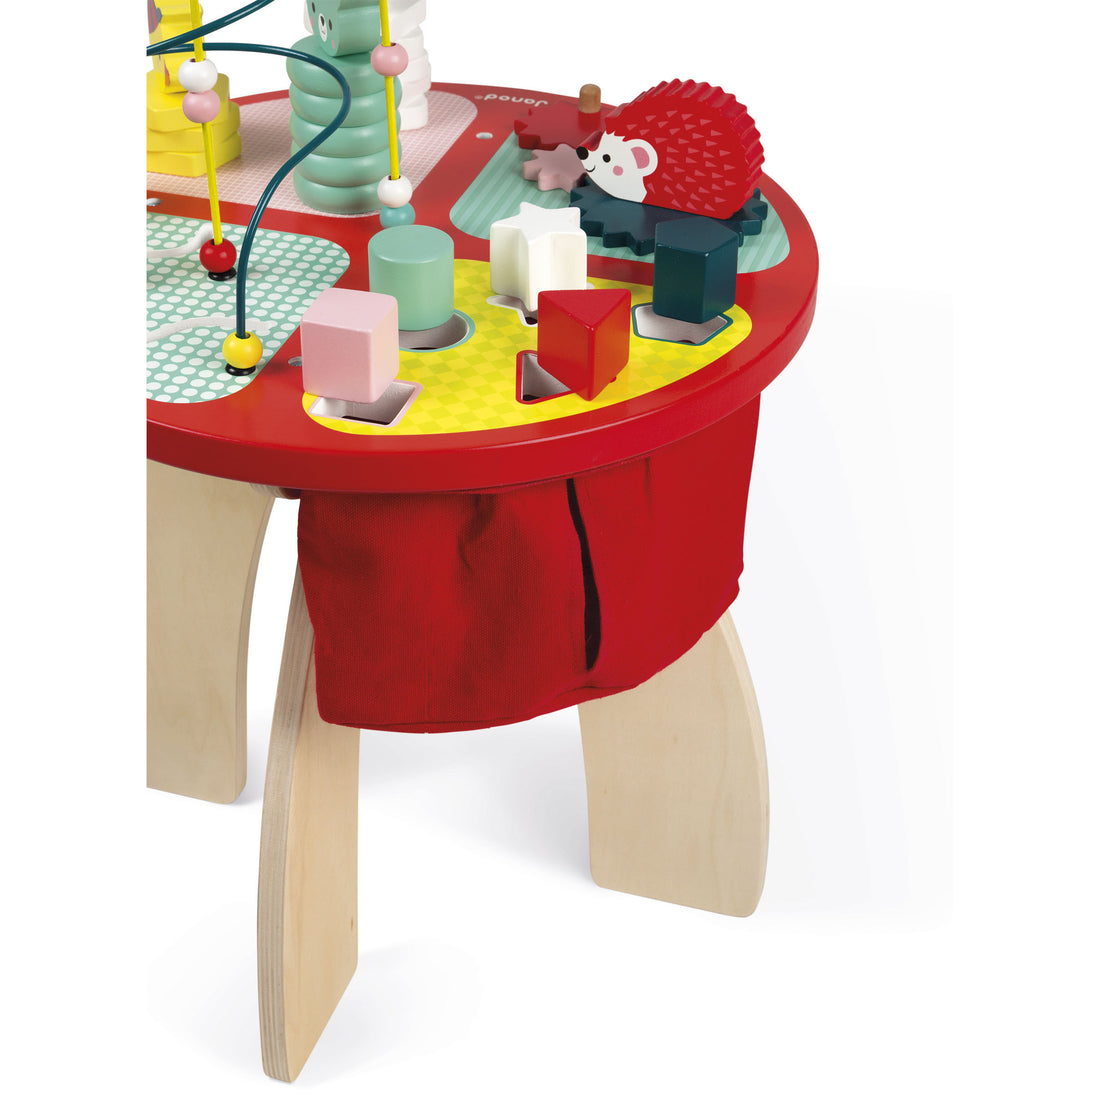 janod-activity-table-baby-forest- (2)